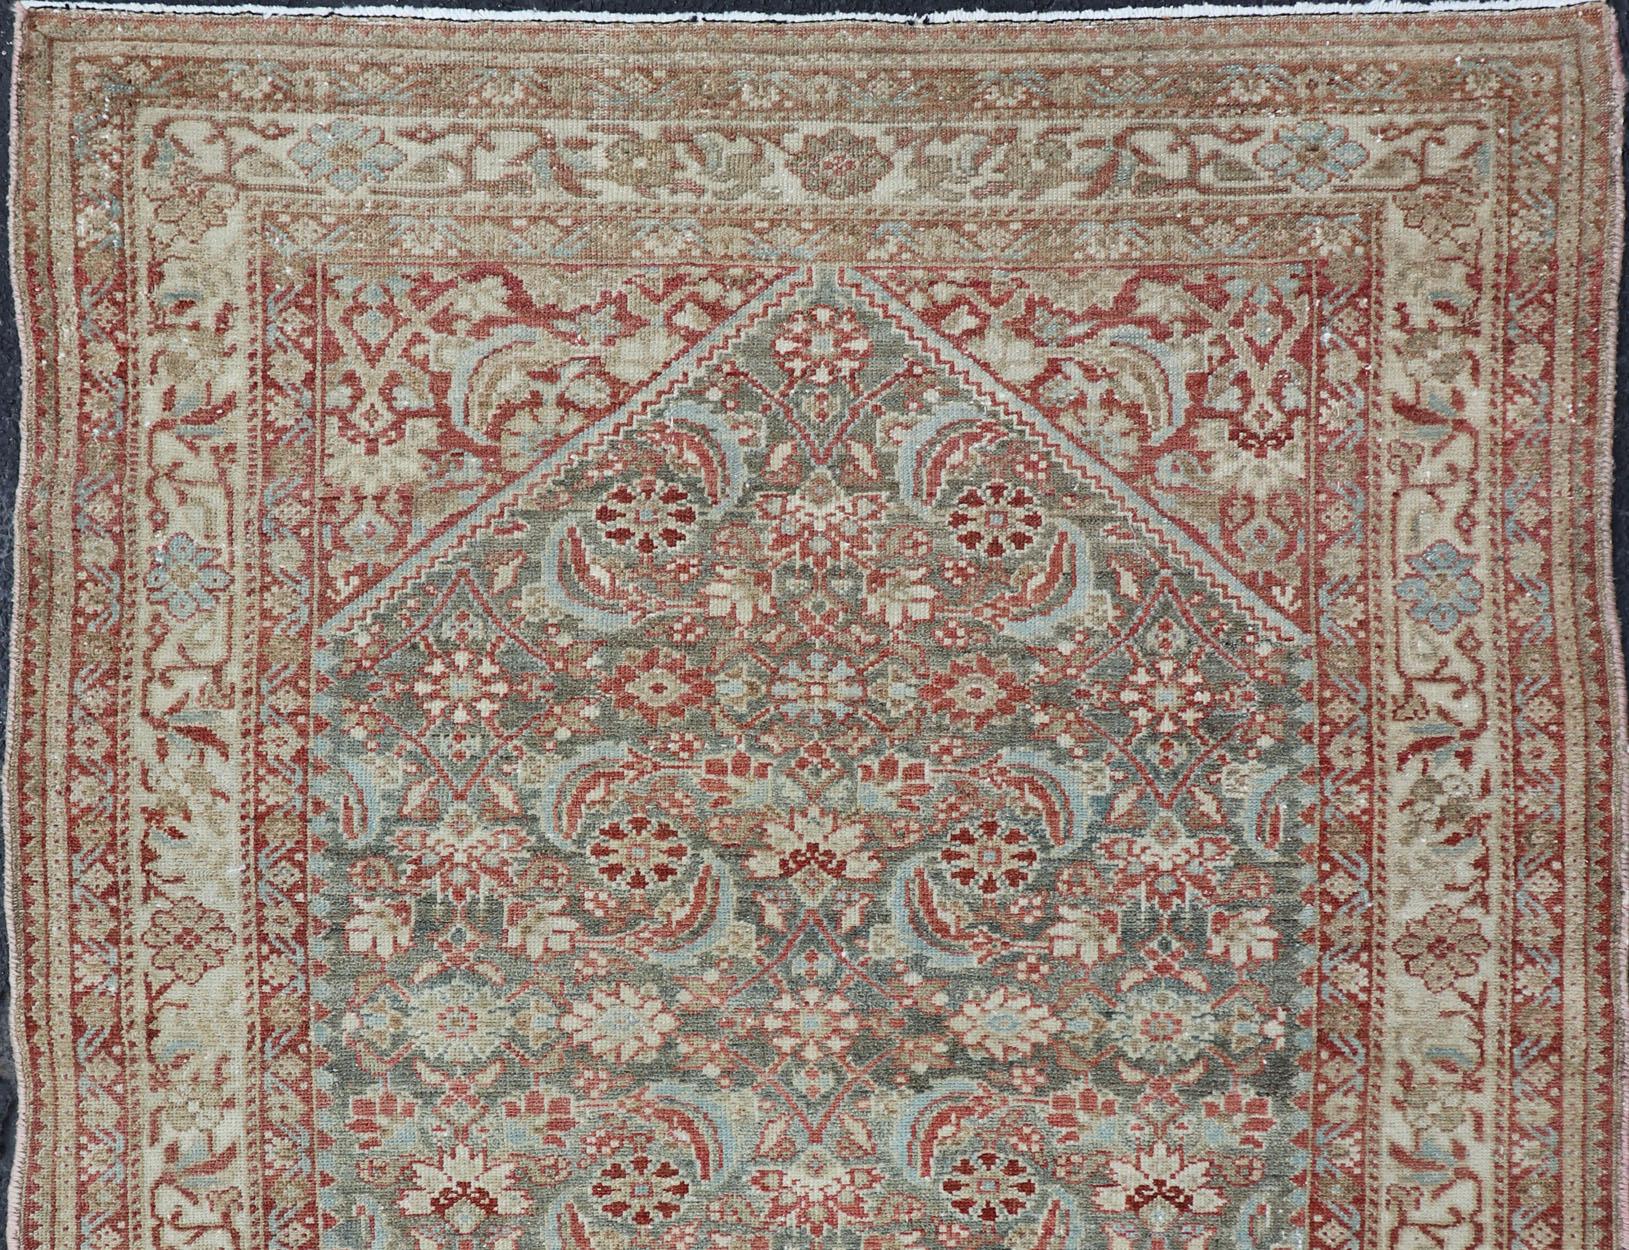 Antique Persian Hamadan rug with colorful geometric design in gray, green and red, rug 19-0307, country of origin / type: Iran / Hamadan, circa 1910.

This antique Persian Hamadan rug (circa early 20th century) features a unique blend of colors